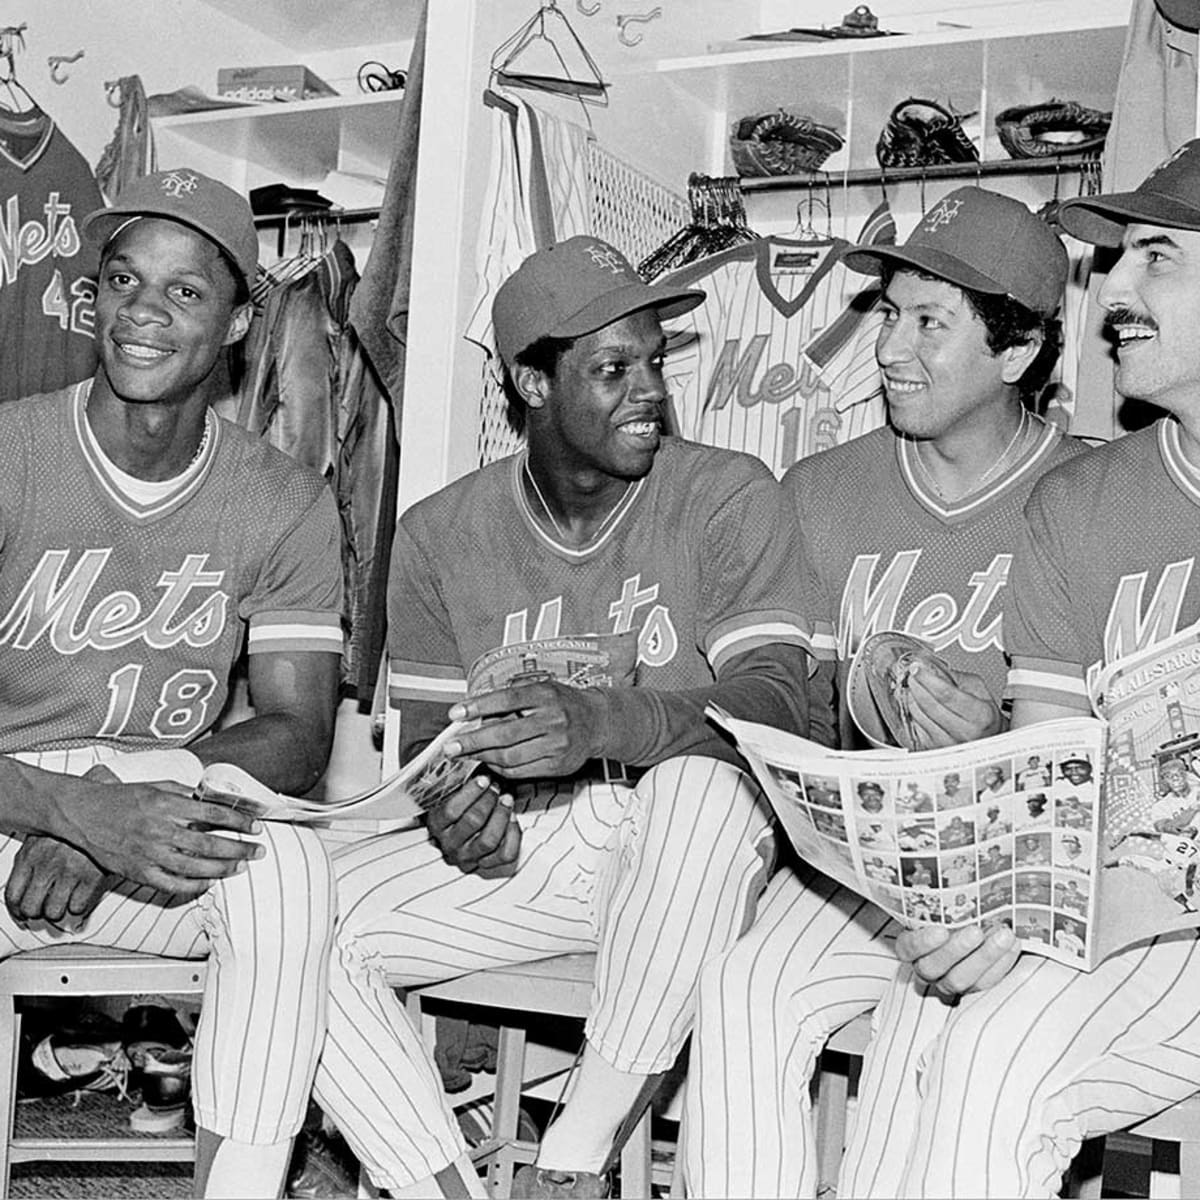 Darryl Strawberry, Dwight Gooden to join New York Mets Hall of